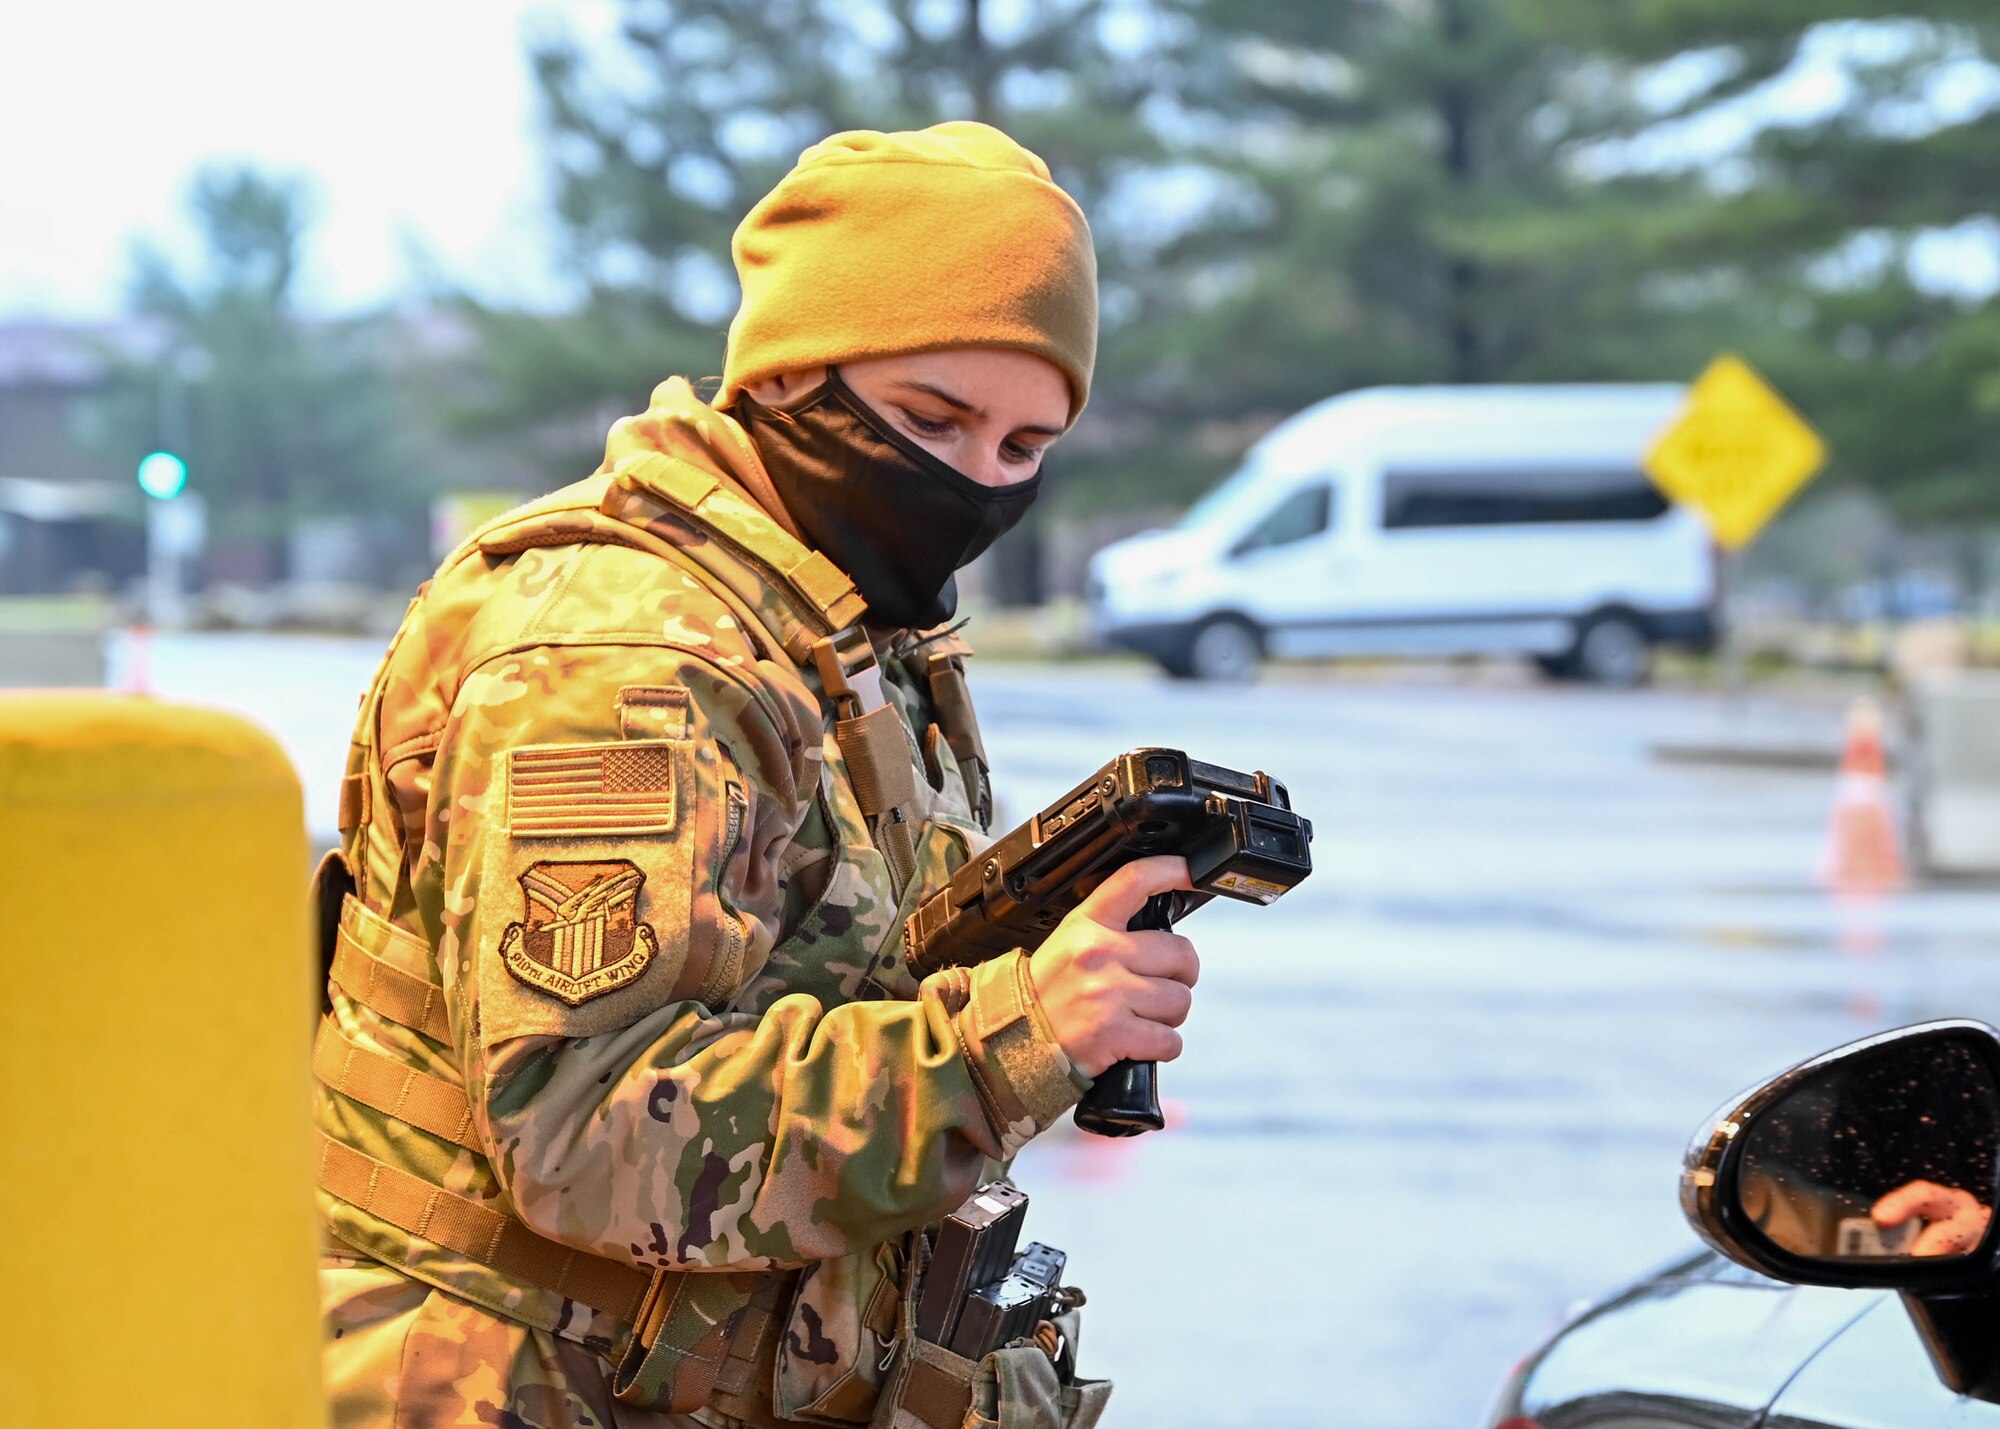 Senior Airman Viktoria Senkiv, a fireteam member assigned to the 910th Security Forces Squadron, checks an ID card at Youngstown Air Reserve Station’s front gate, Dec. 6, 2021.